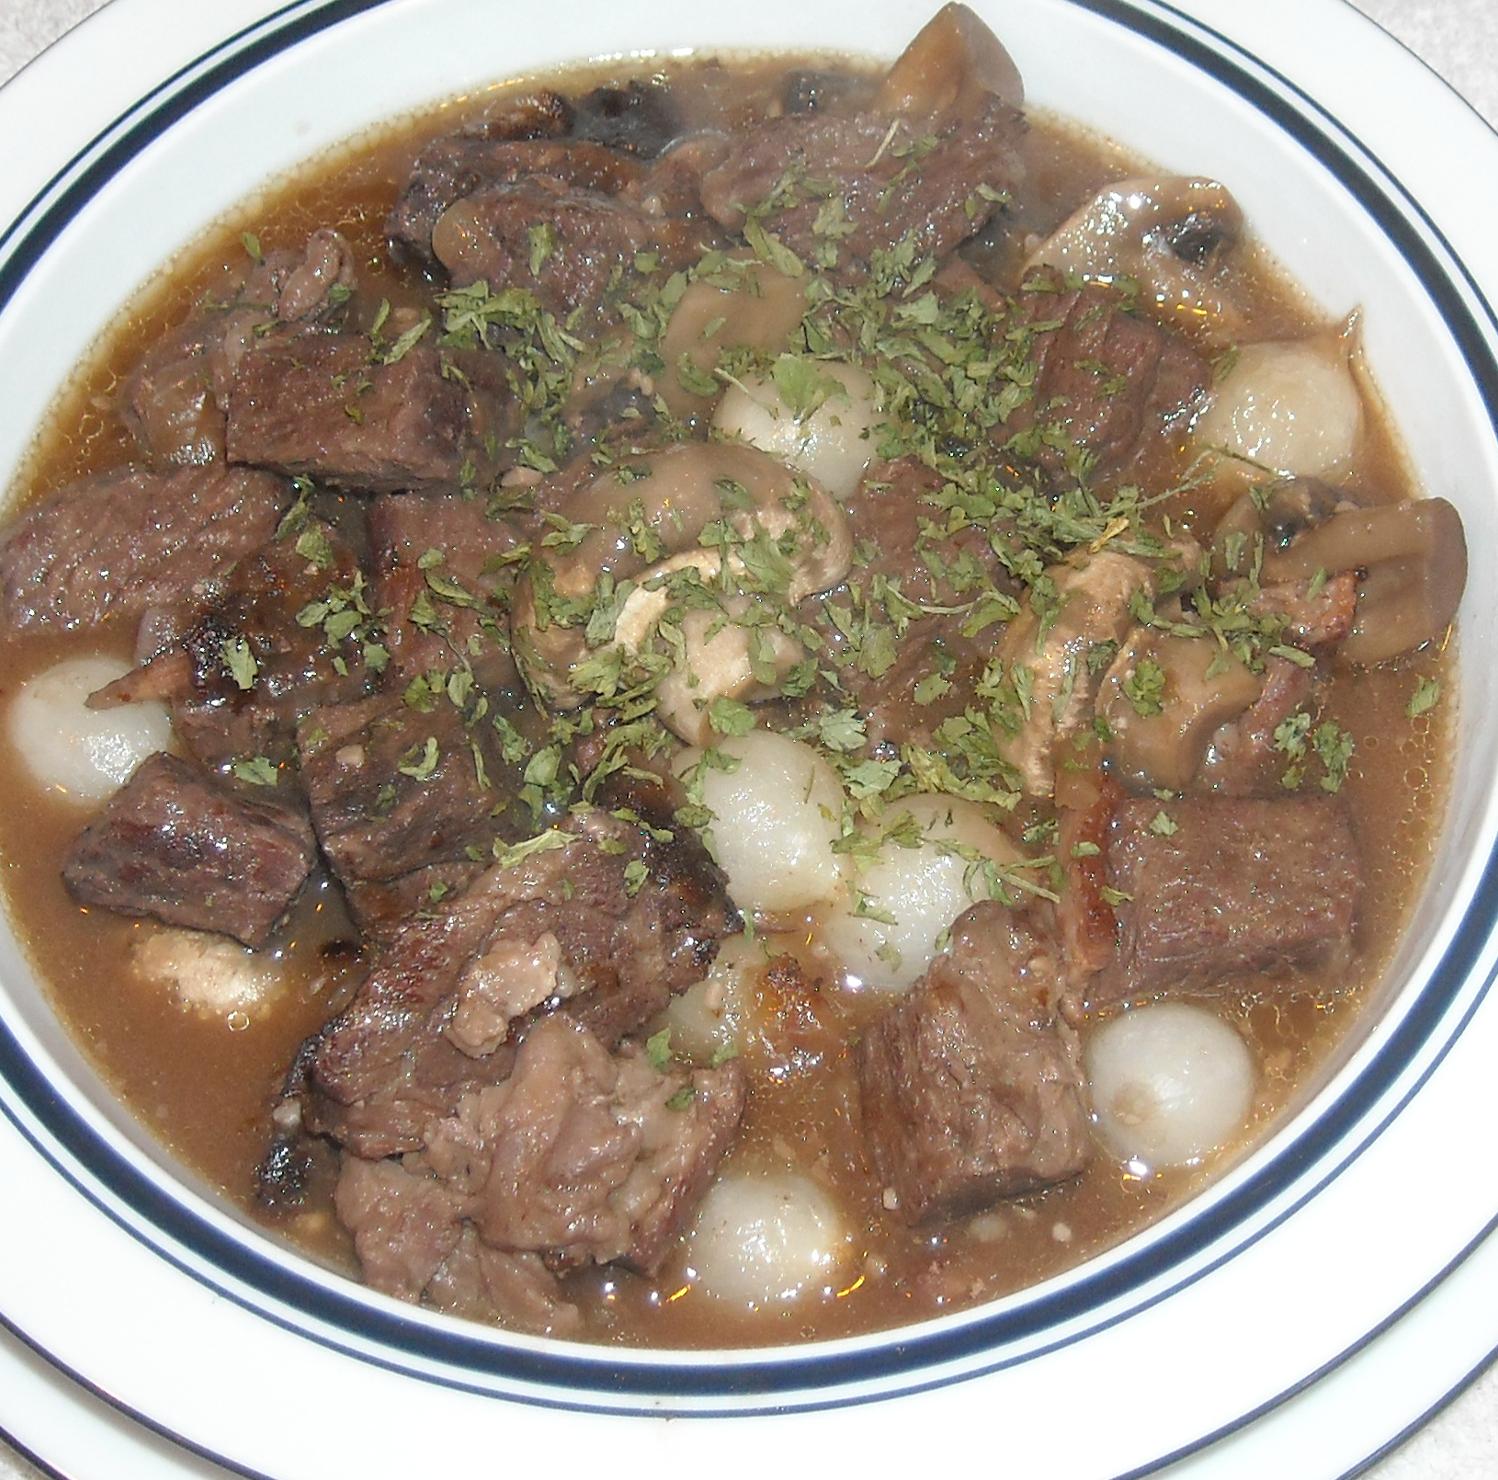  Rich aromas of red wine and beef will permeate your kitchen with this stew.